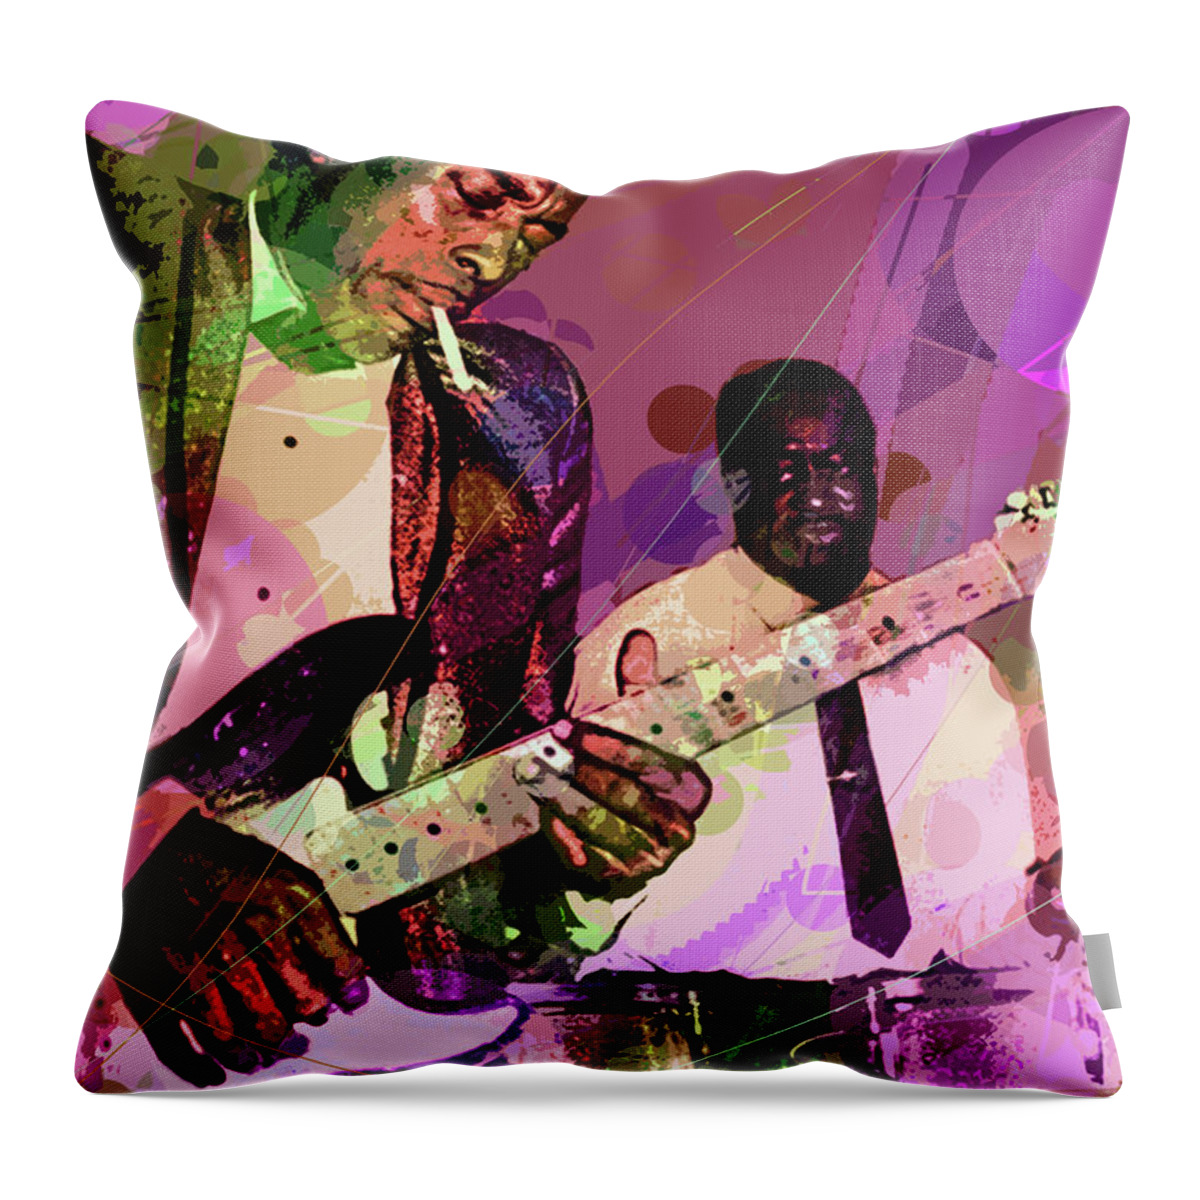 Buddy Guy Throw Pillow featuring the painting Buddy Guy 1965 by David Lloyd Glover